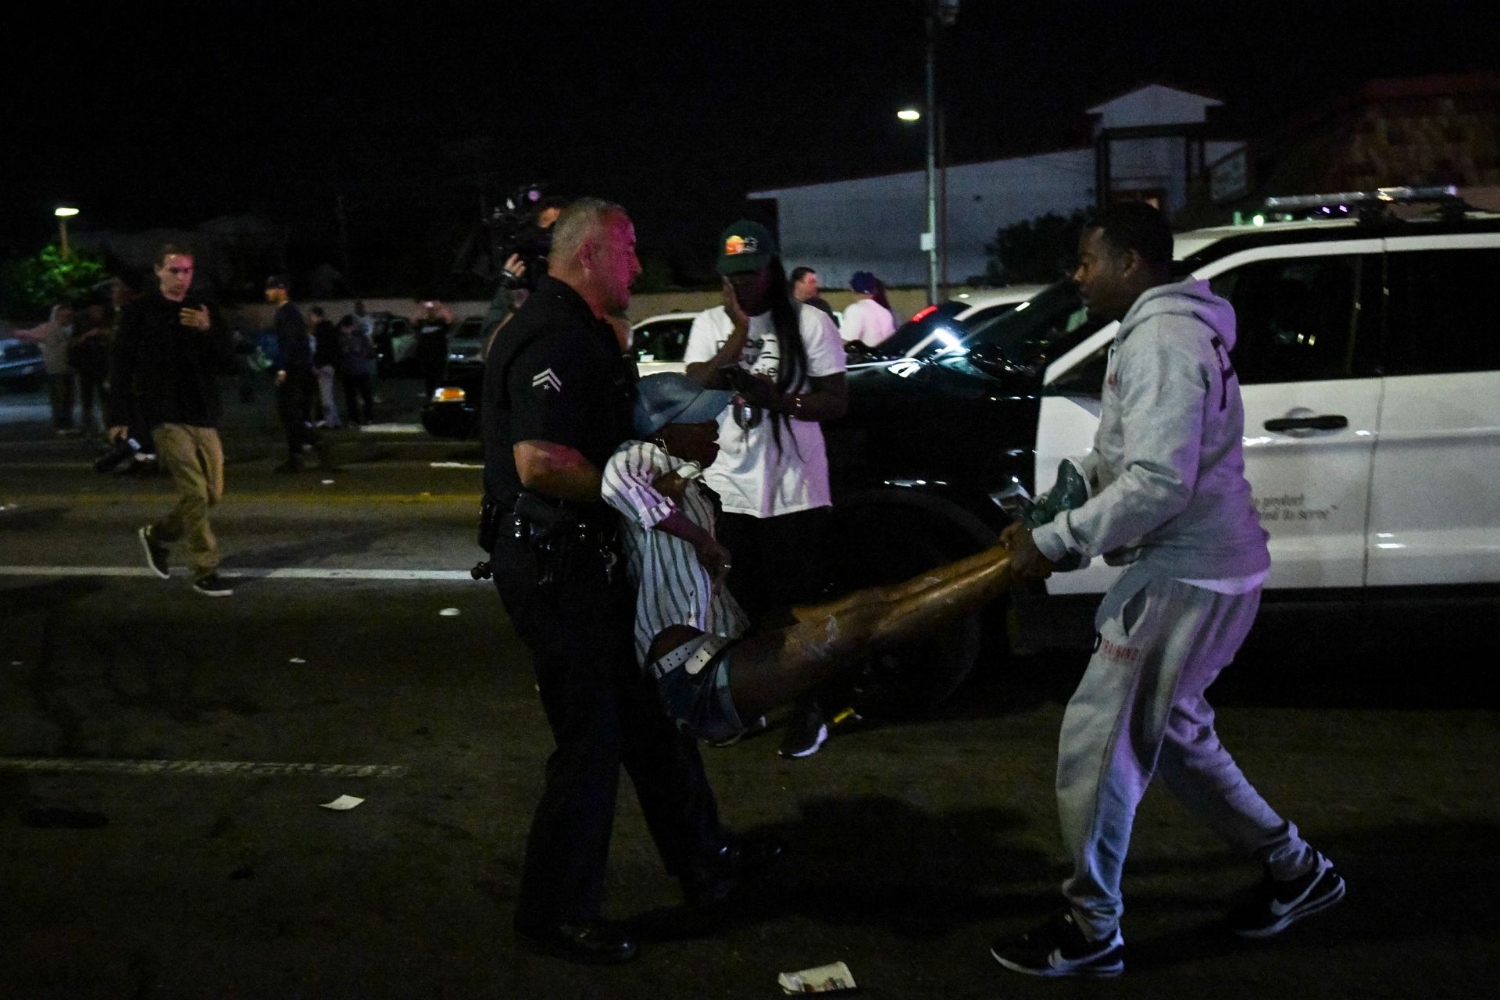 An injured woman is carried to an ambulance after multiple people were stabbed on April 1, 2019 in Los Angeles outside of Nipsey Hussle's clothing store. Harrison Hill, USA TODAY